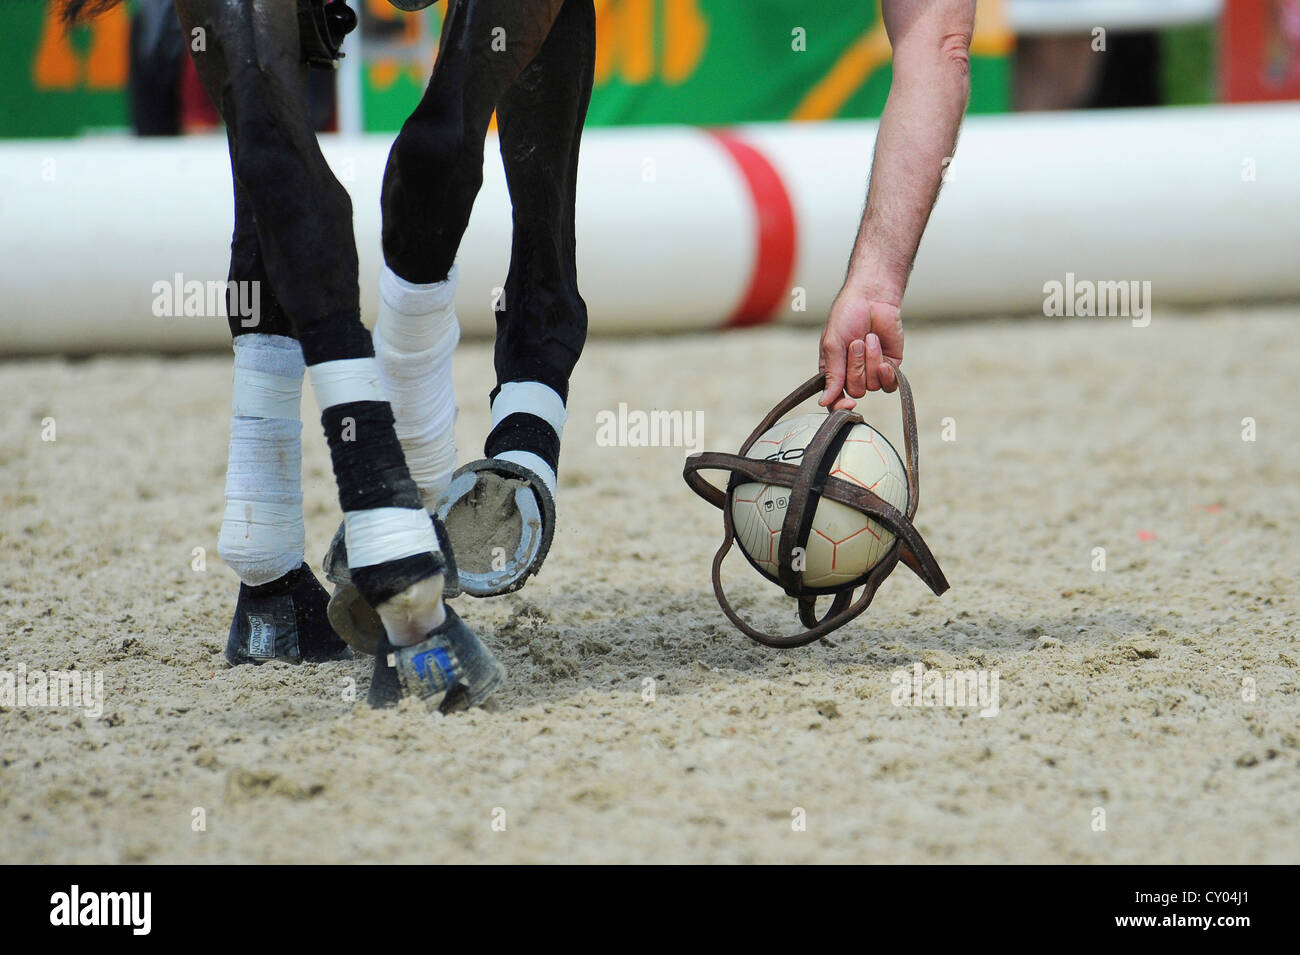 A horseball player picking up the ball Stock Photo